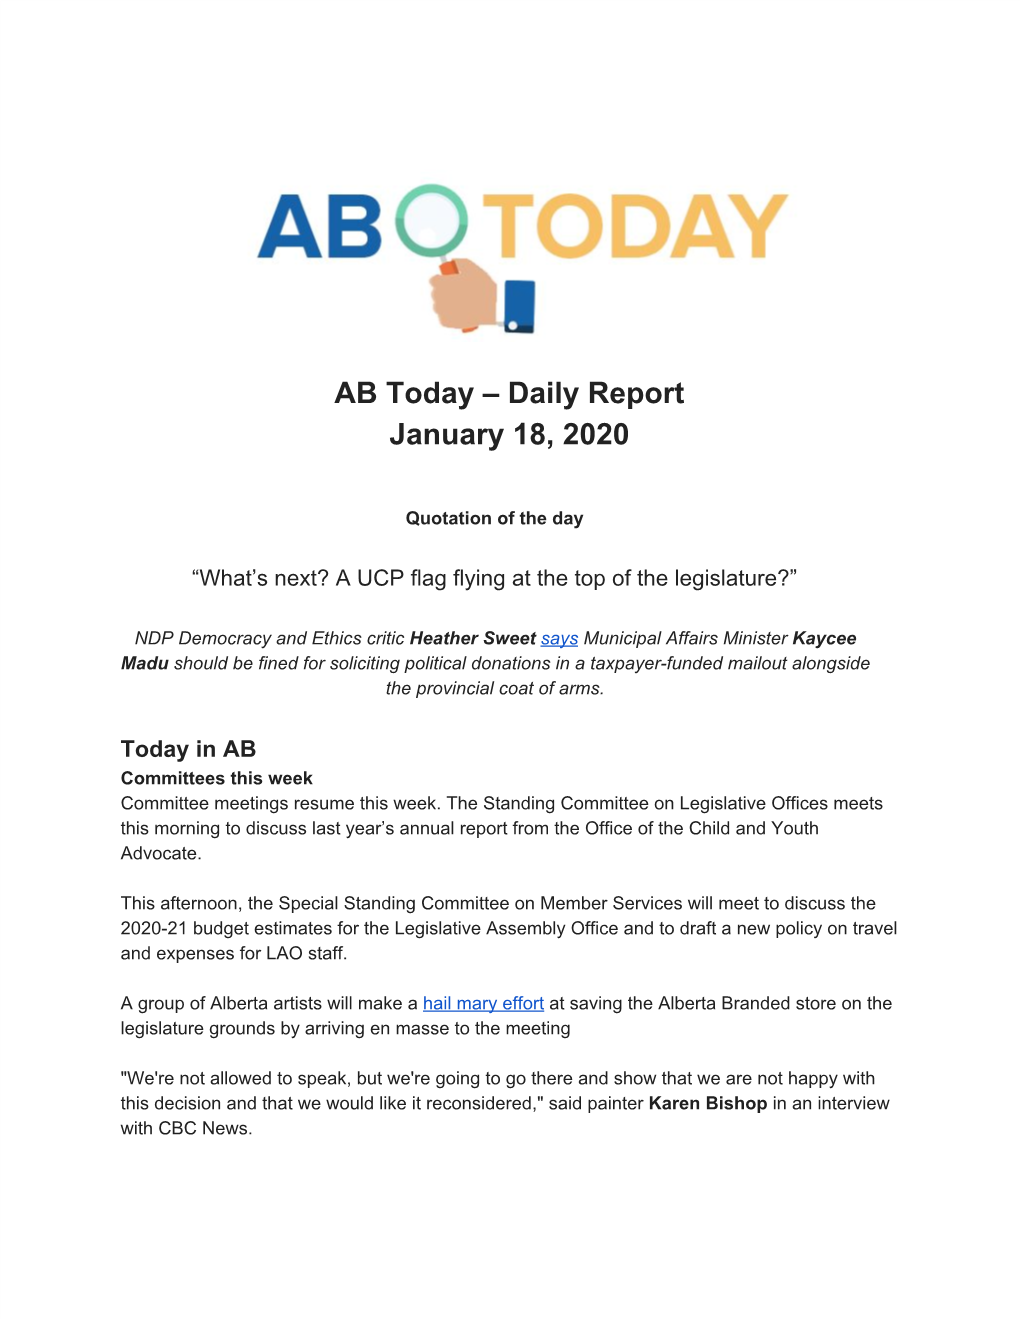 AB Today – Daily Report January 18, 2020